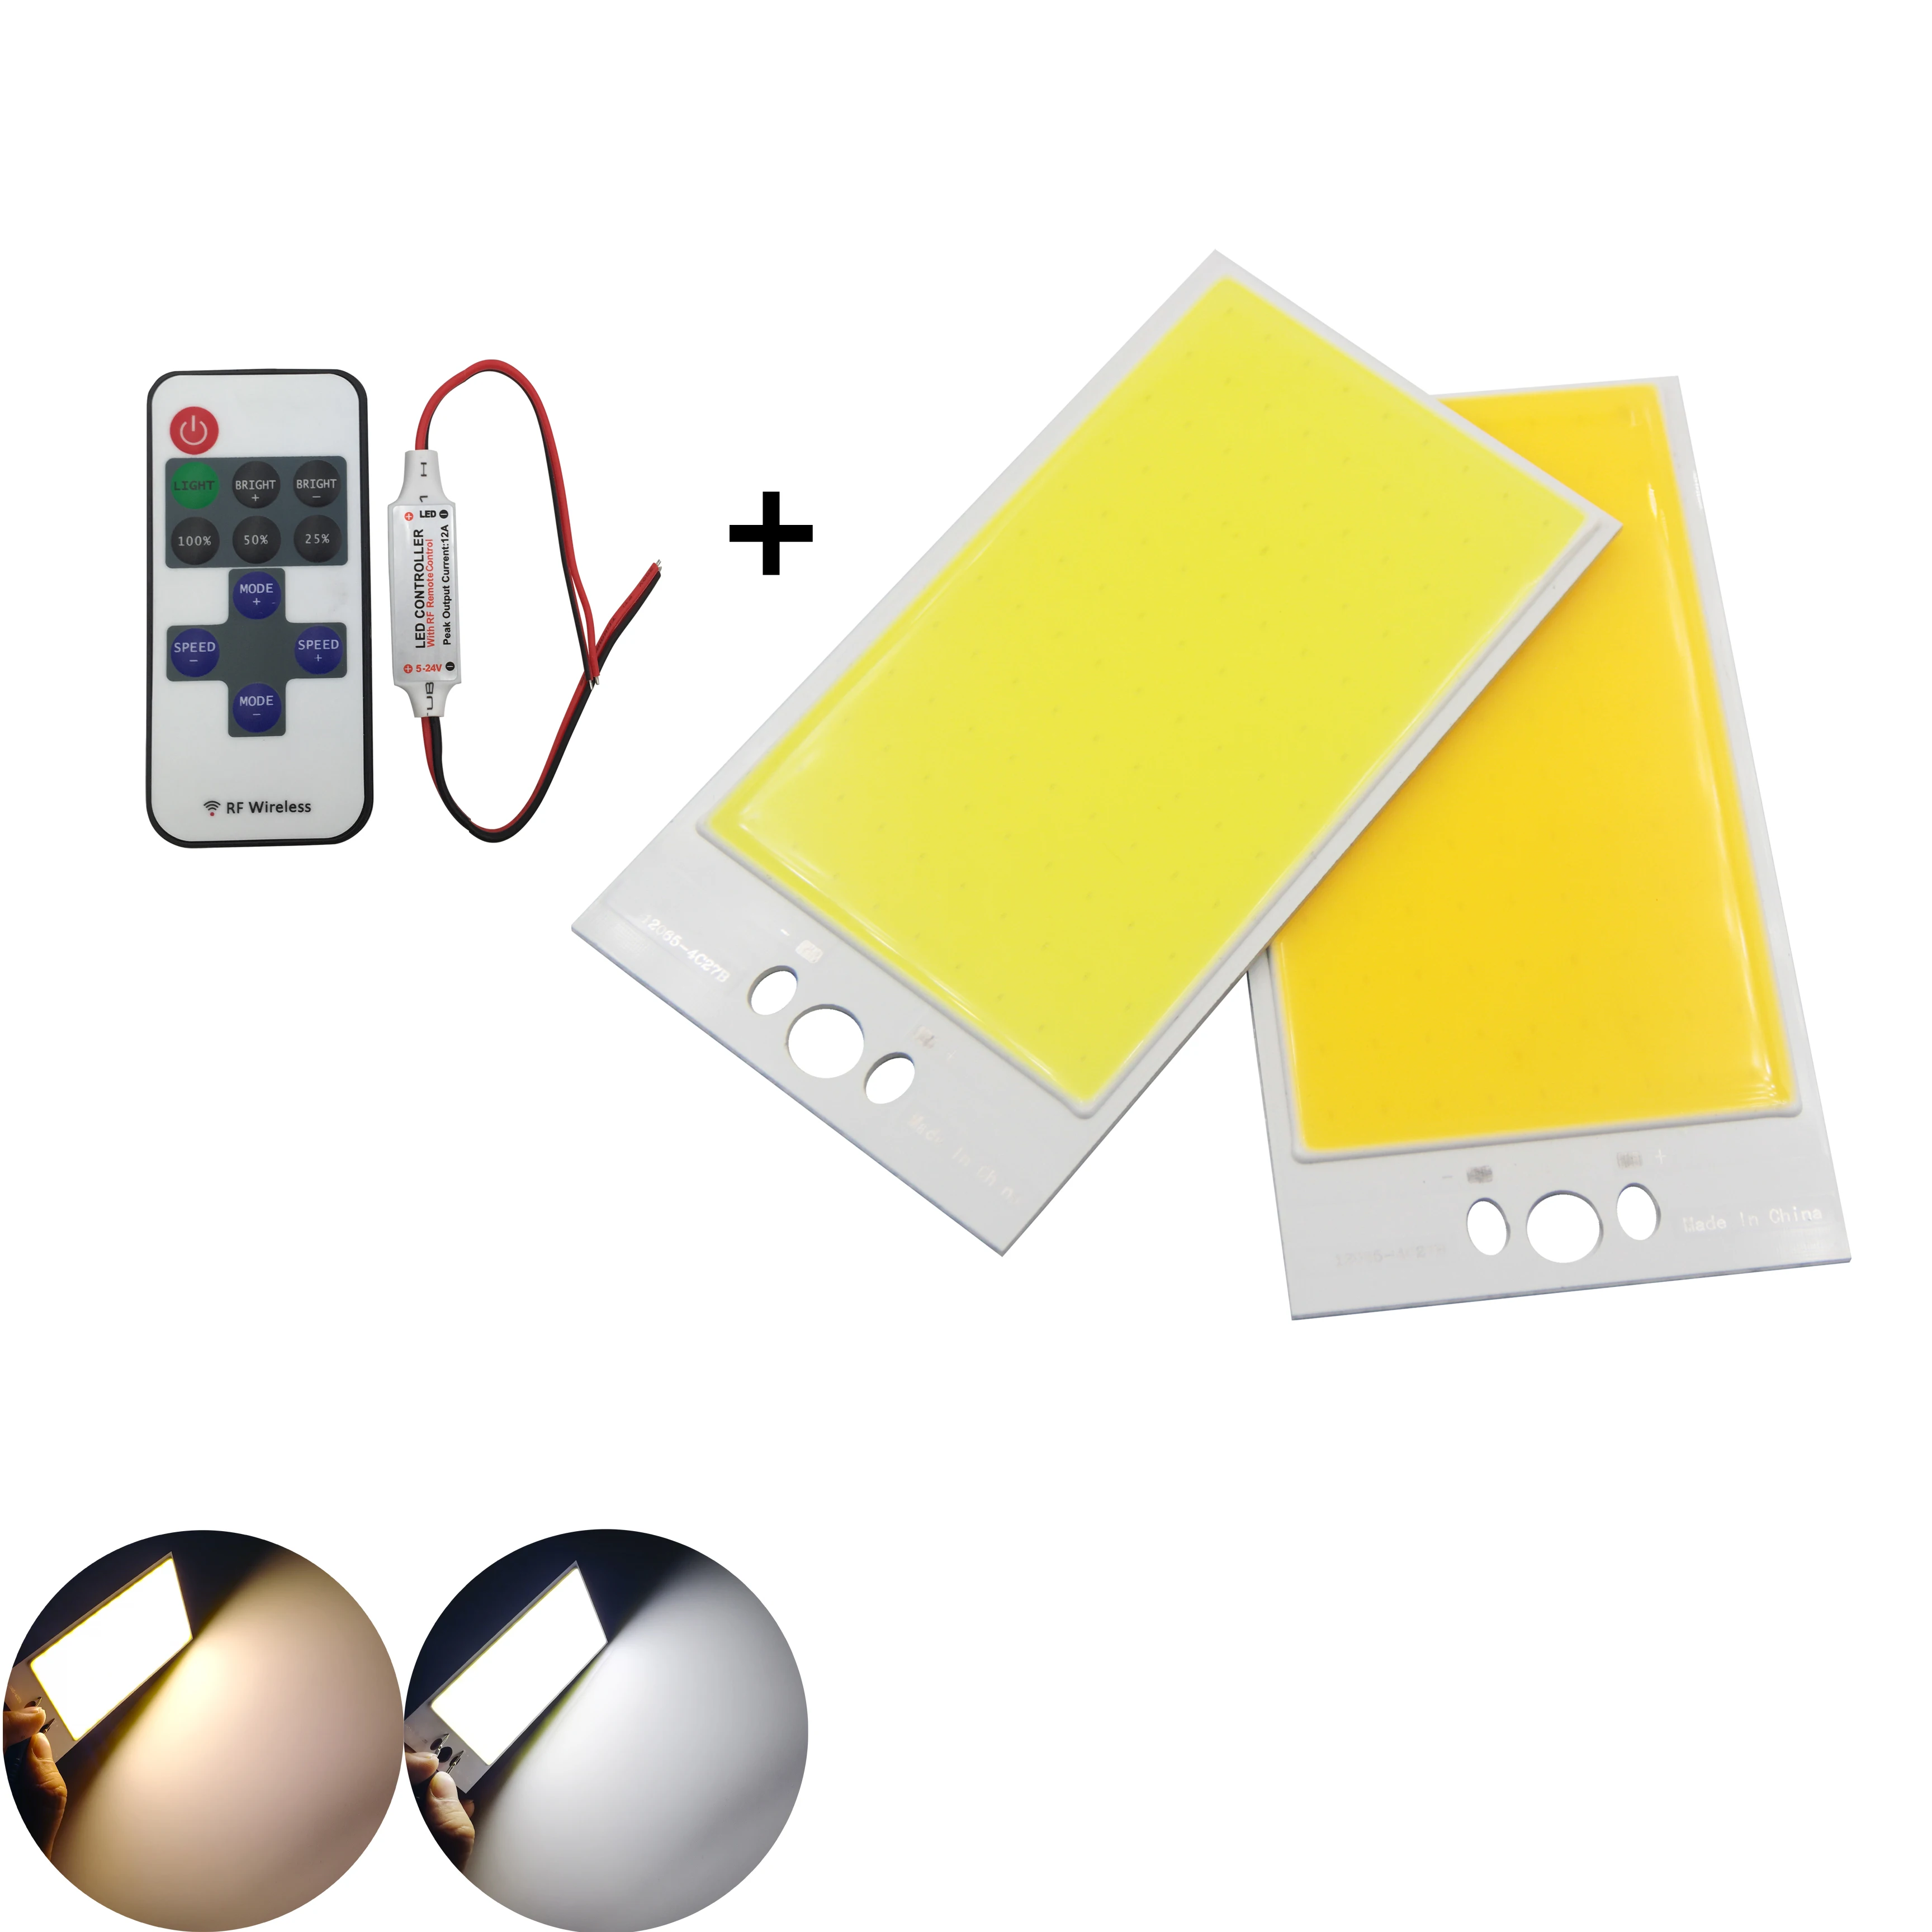 dimmable Lamp 12V 12cm 15W LED COB light with wireless RF remote controller smooth diy auto Light COB LED strip bulb modules 9 12cm 1000pcs multi color gift bags for jewelry wedding christmas birthday yarn bag with handles packaging gifts organza bags